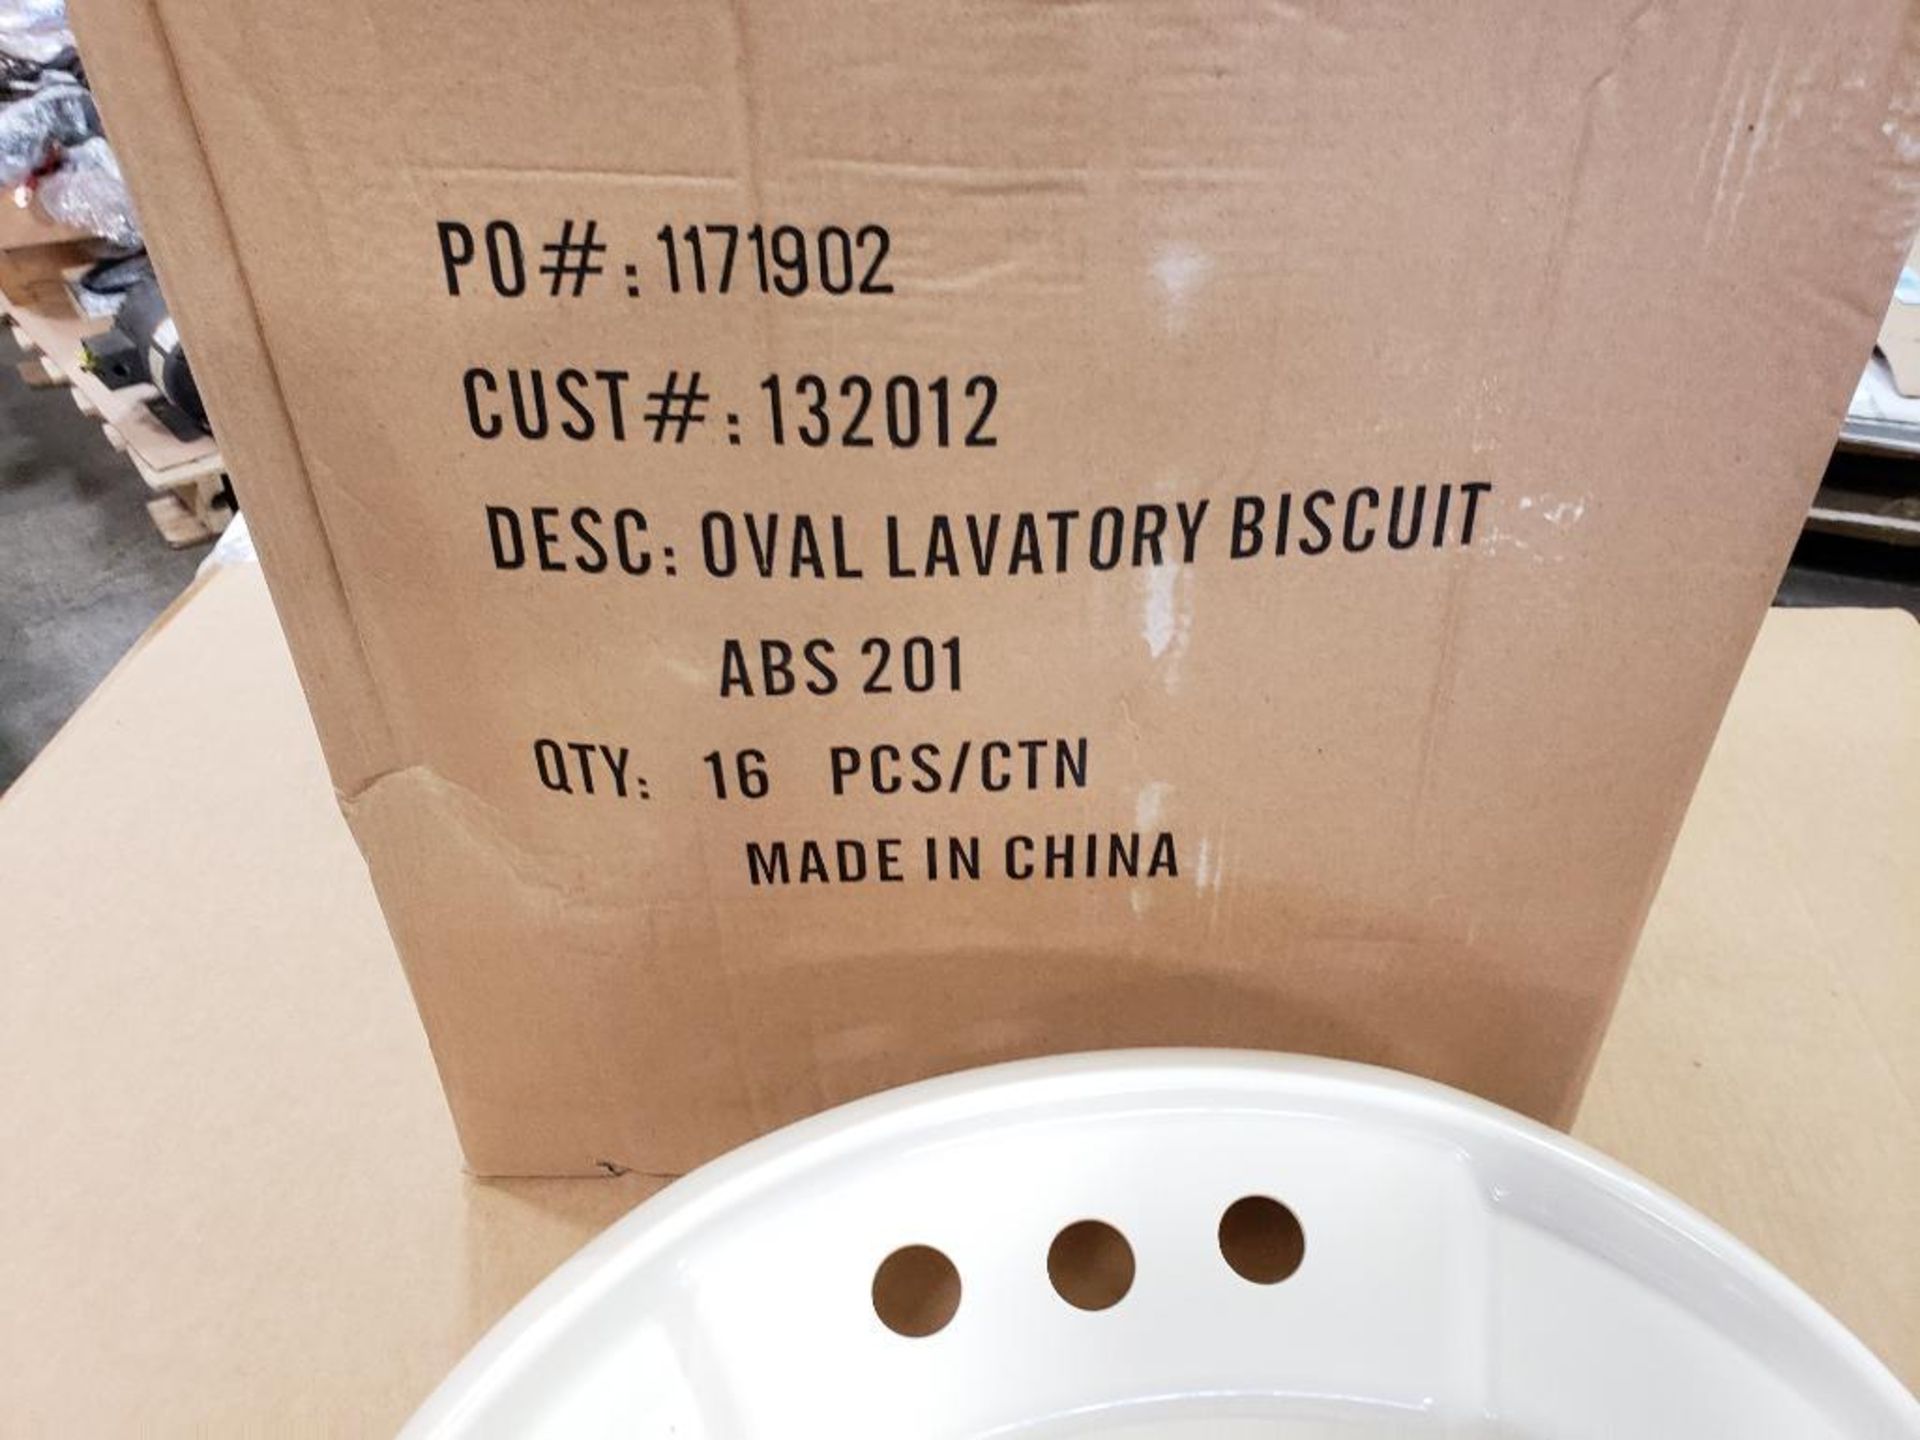 Qty 64 - Oval Lavatory, biscuit ABS201. New in bulk box. - Image 2 of 3